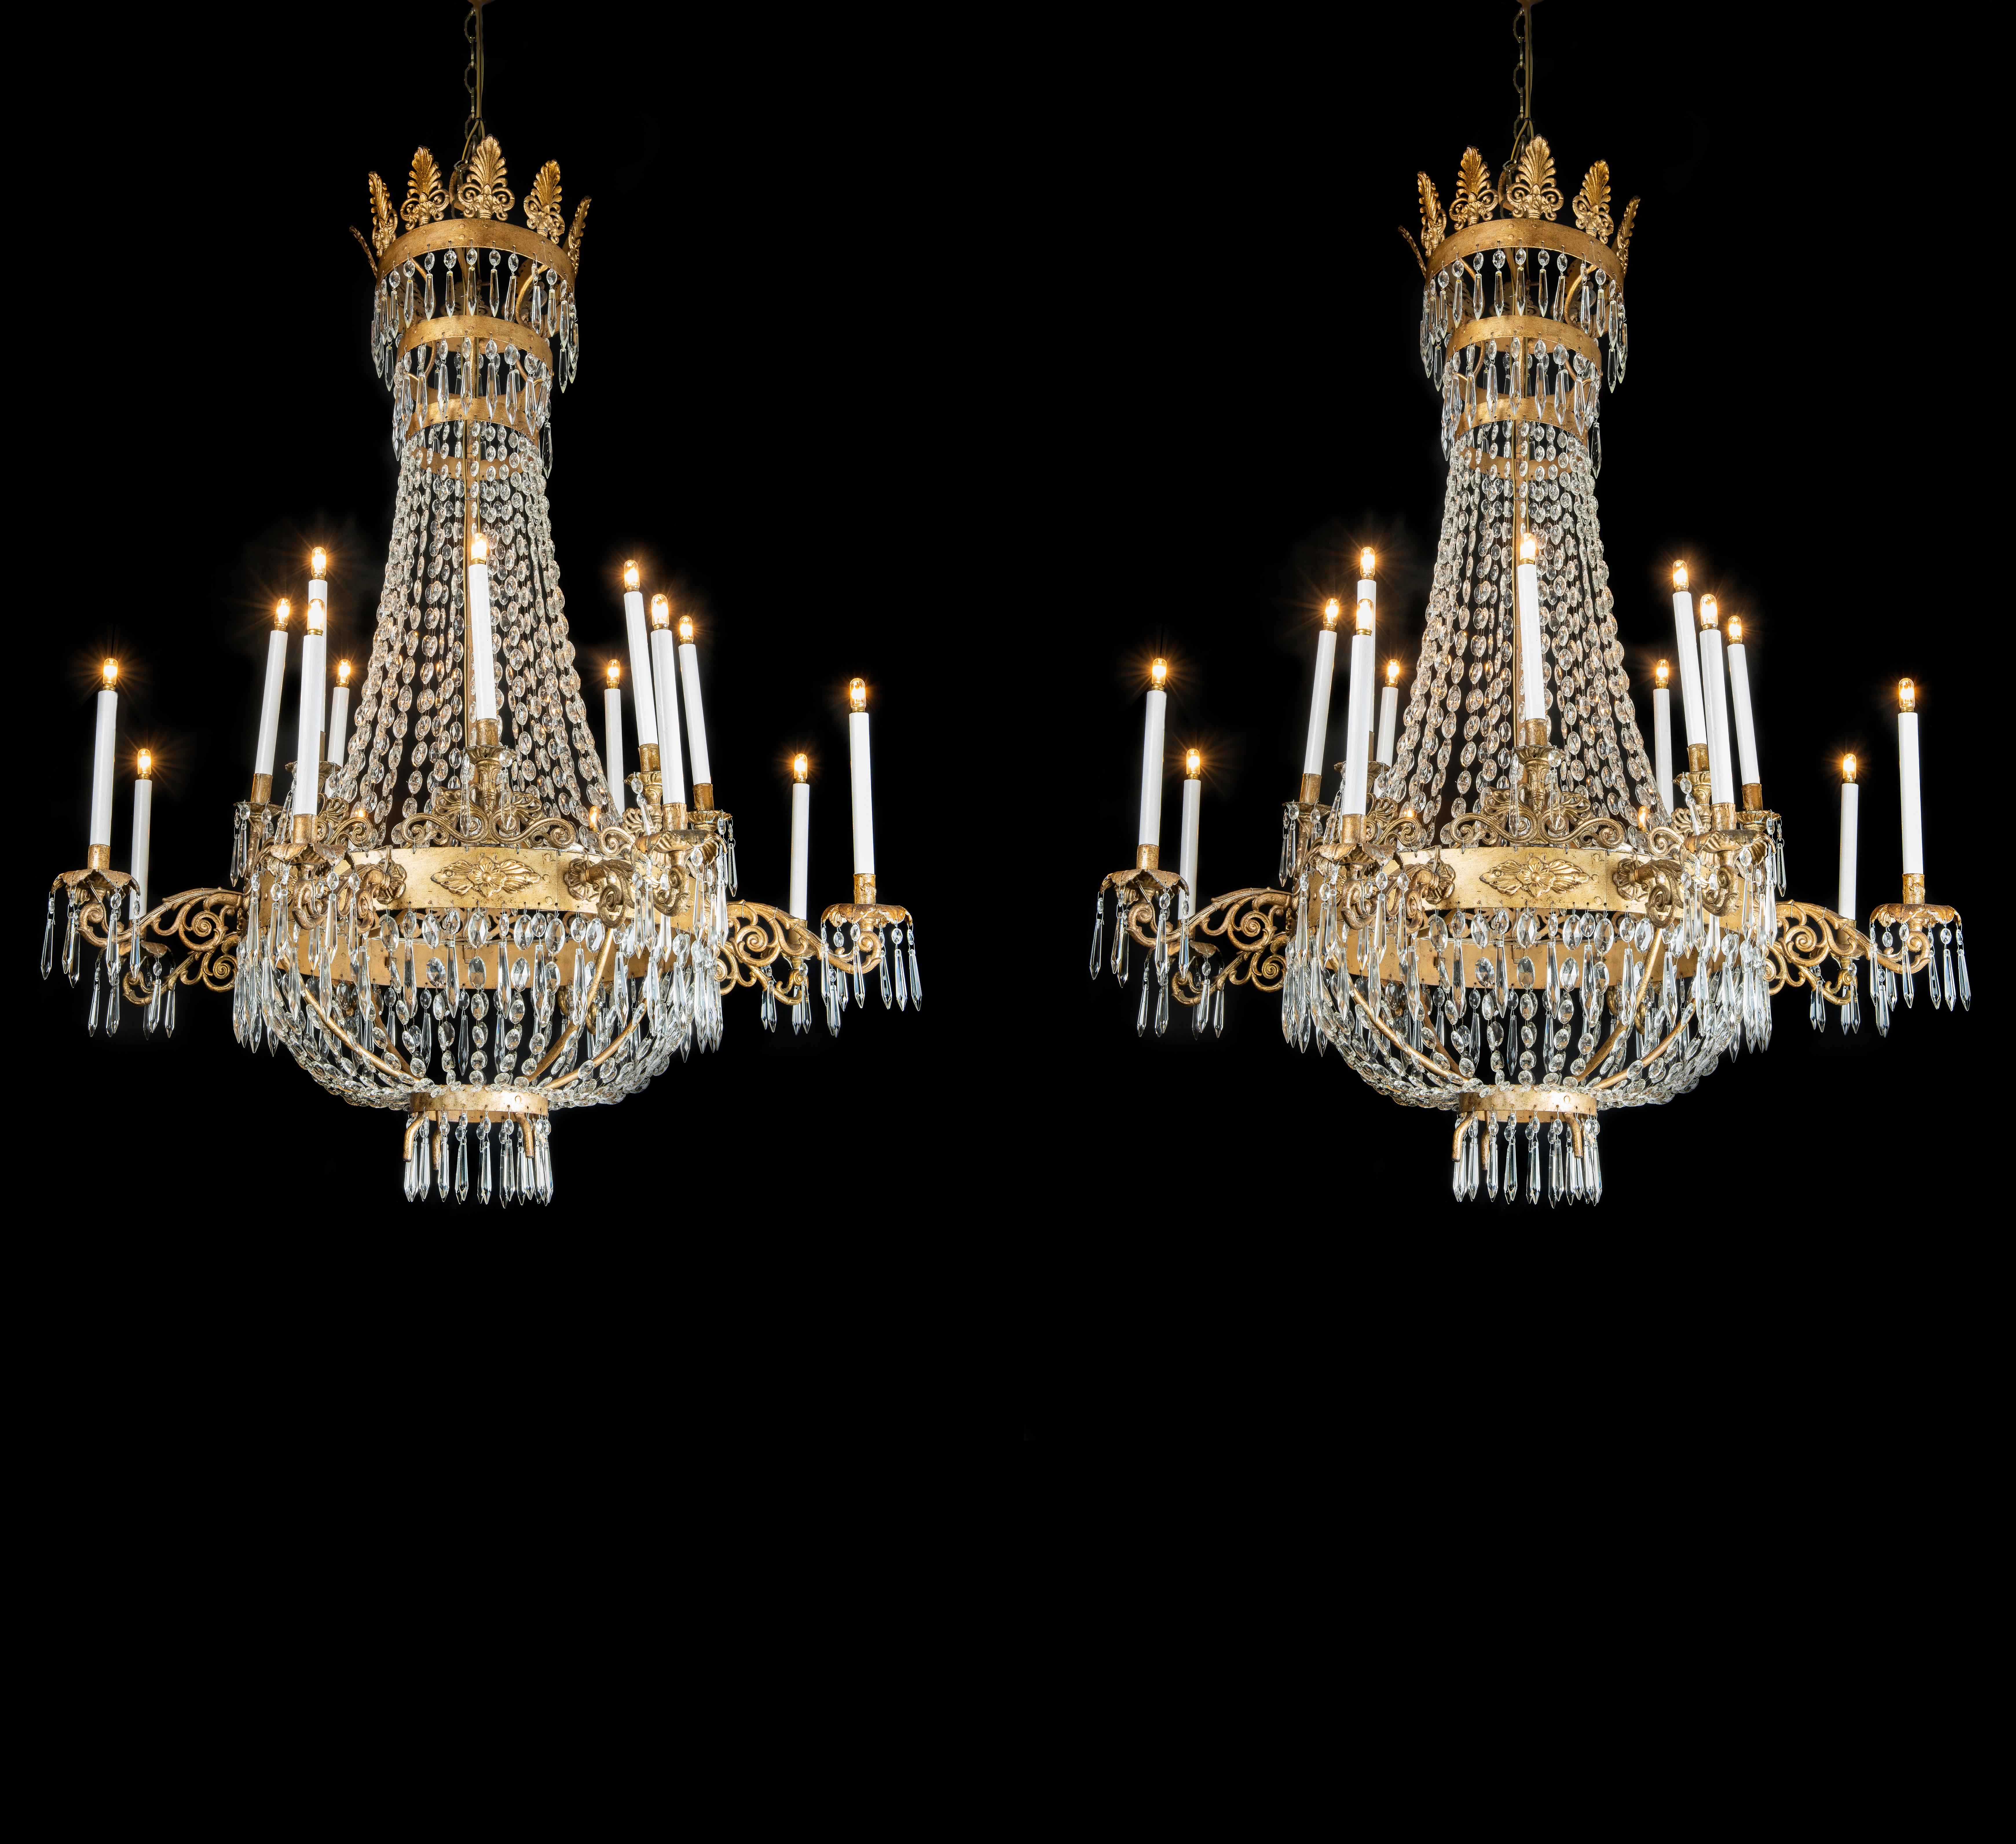 A large scale pair of Italian Empire period crystal and mecca gilt iron chandeliers,  an hand-made circular structure featuring two tiers supporting sixteen arms, dating back to early 19th century of Italian origin, coming from a Piedmontese private